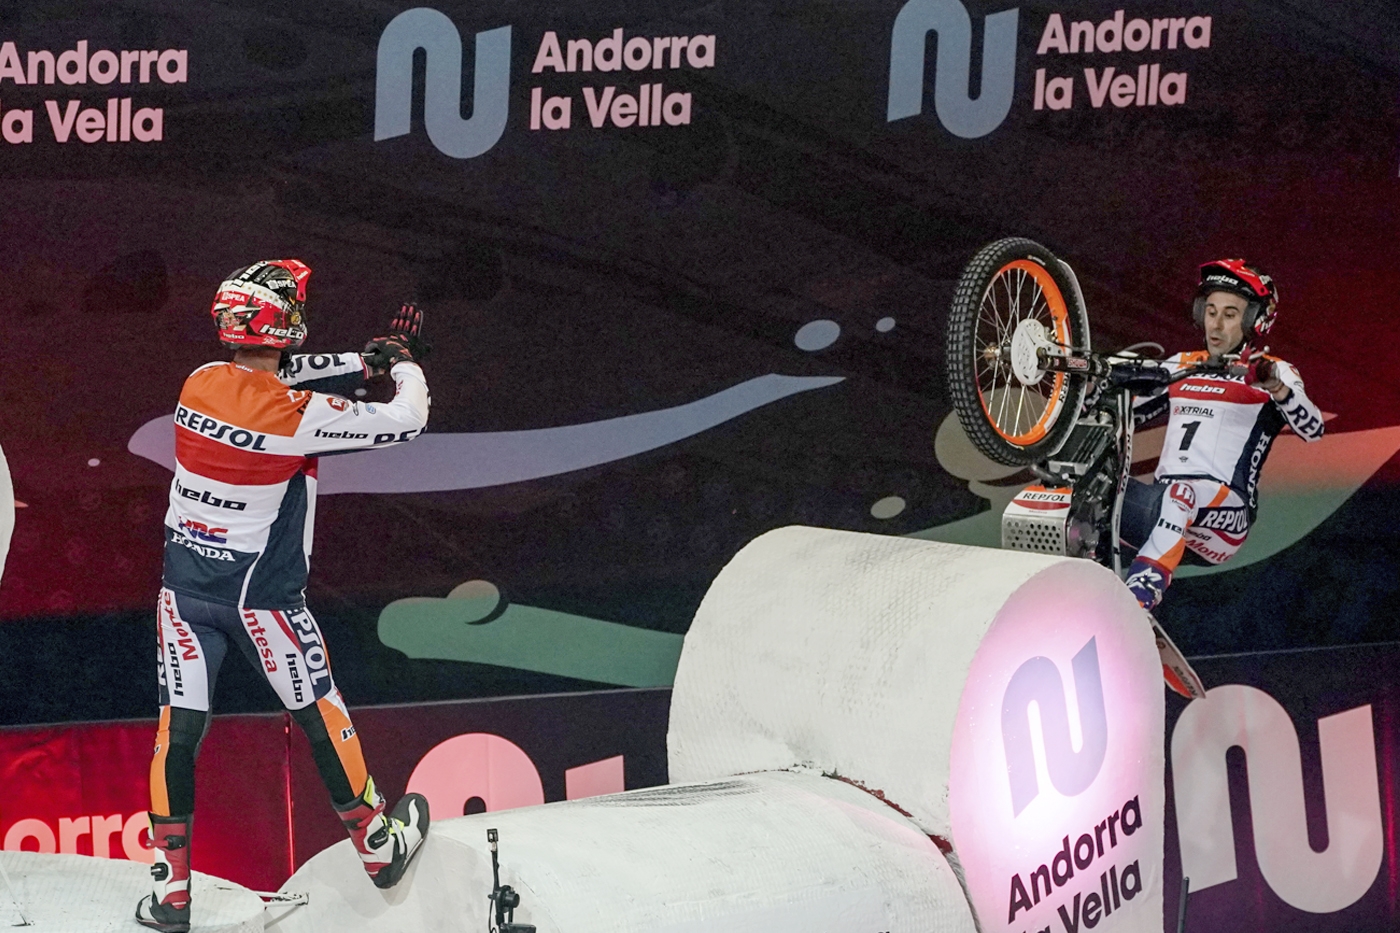 Andorra awaits the eight best riders in the world